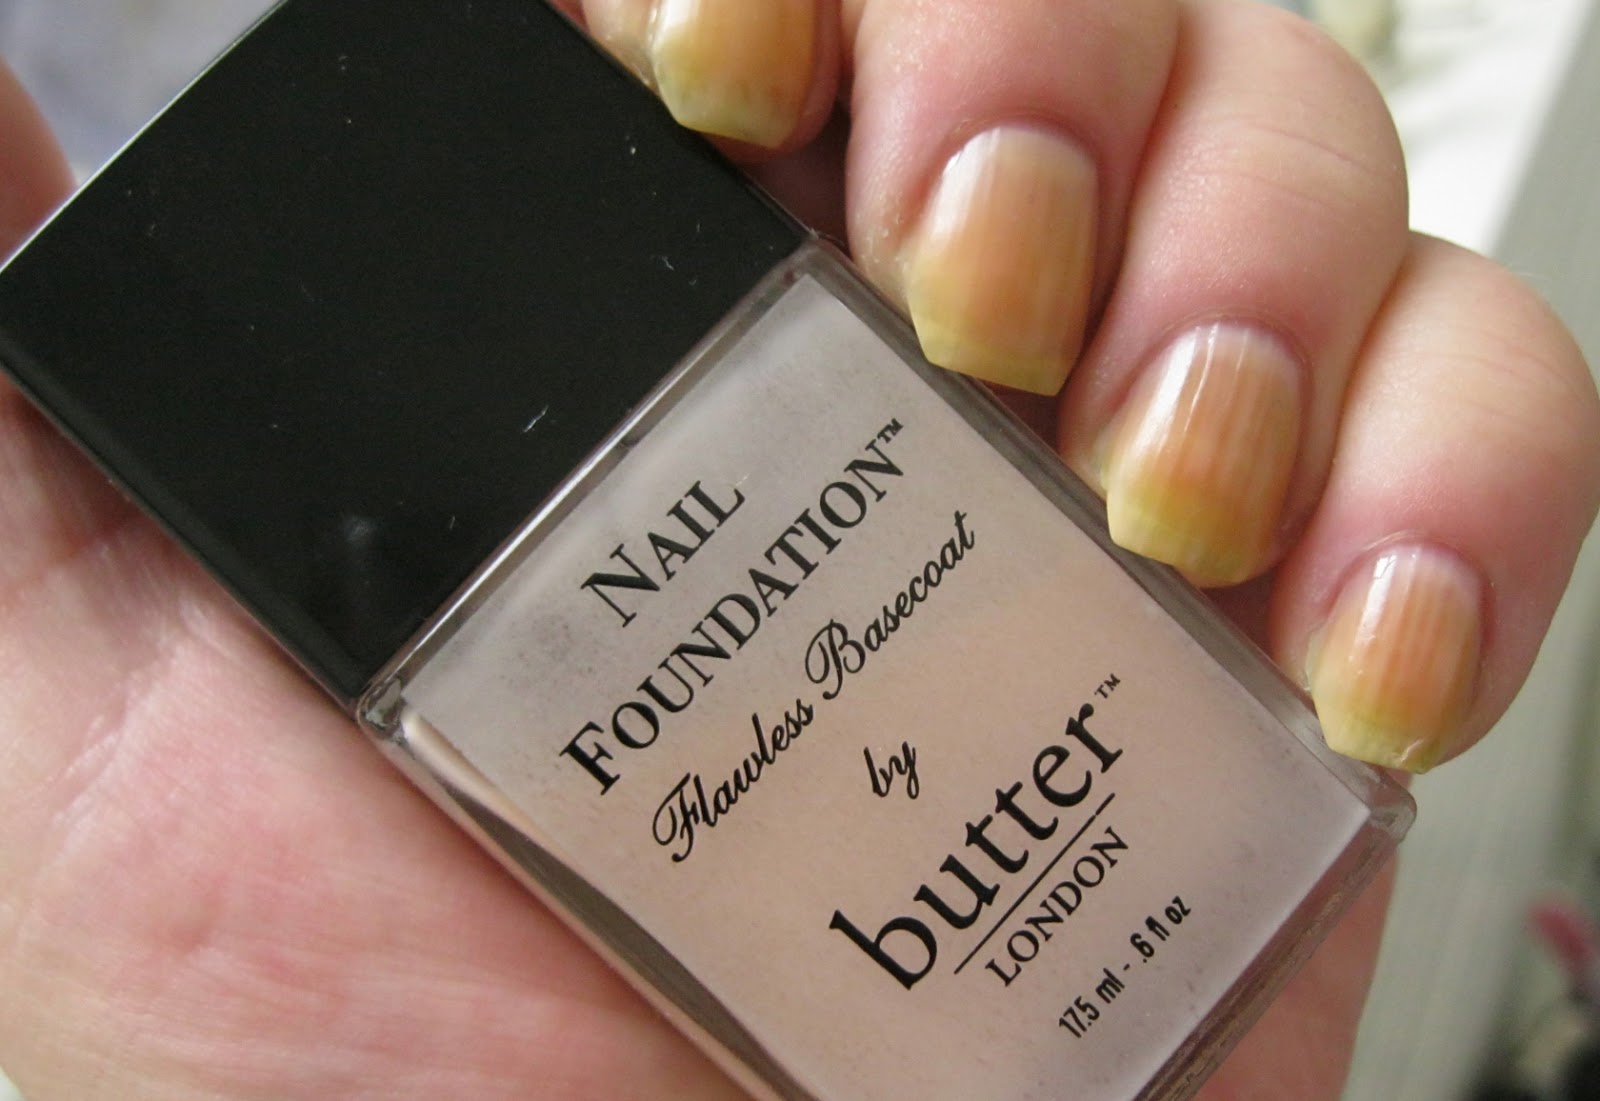 7. Butter London Nail Lacquer in "Queen Vic" - wide 3